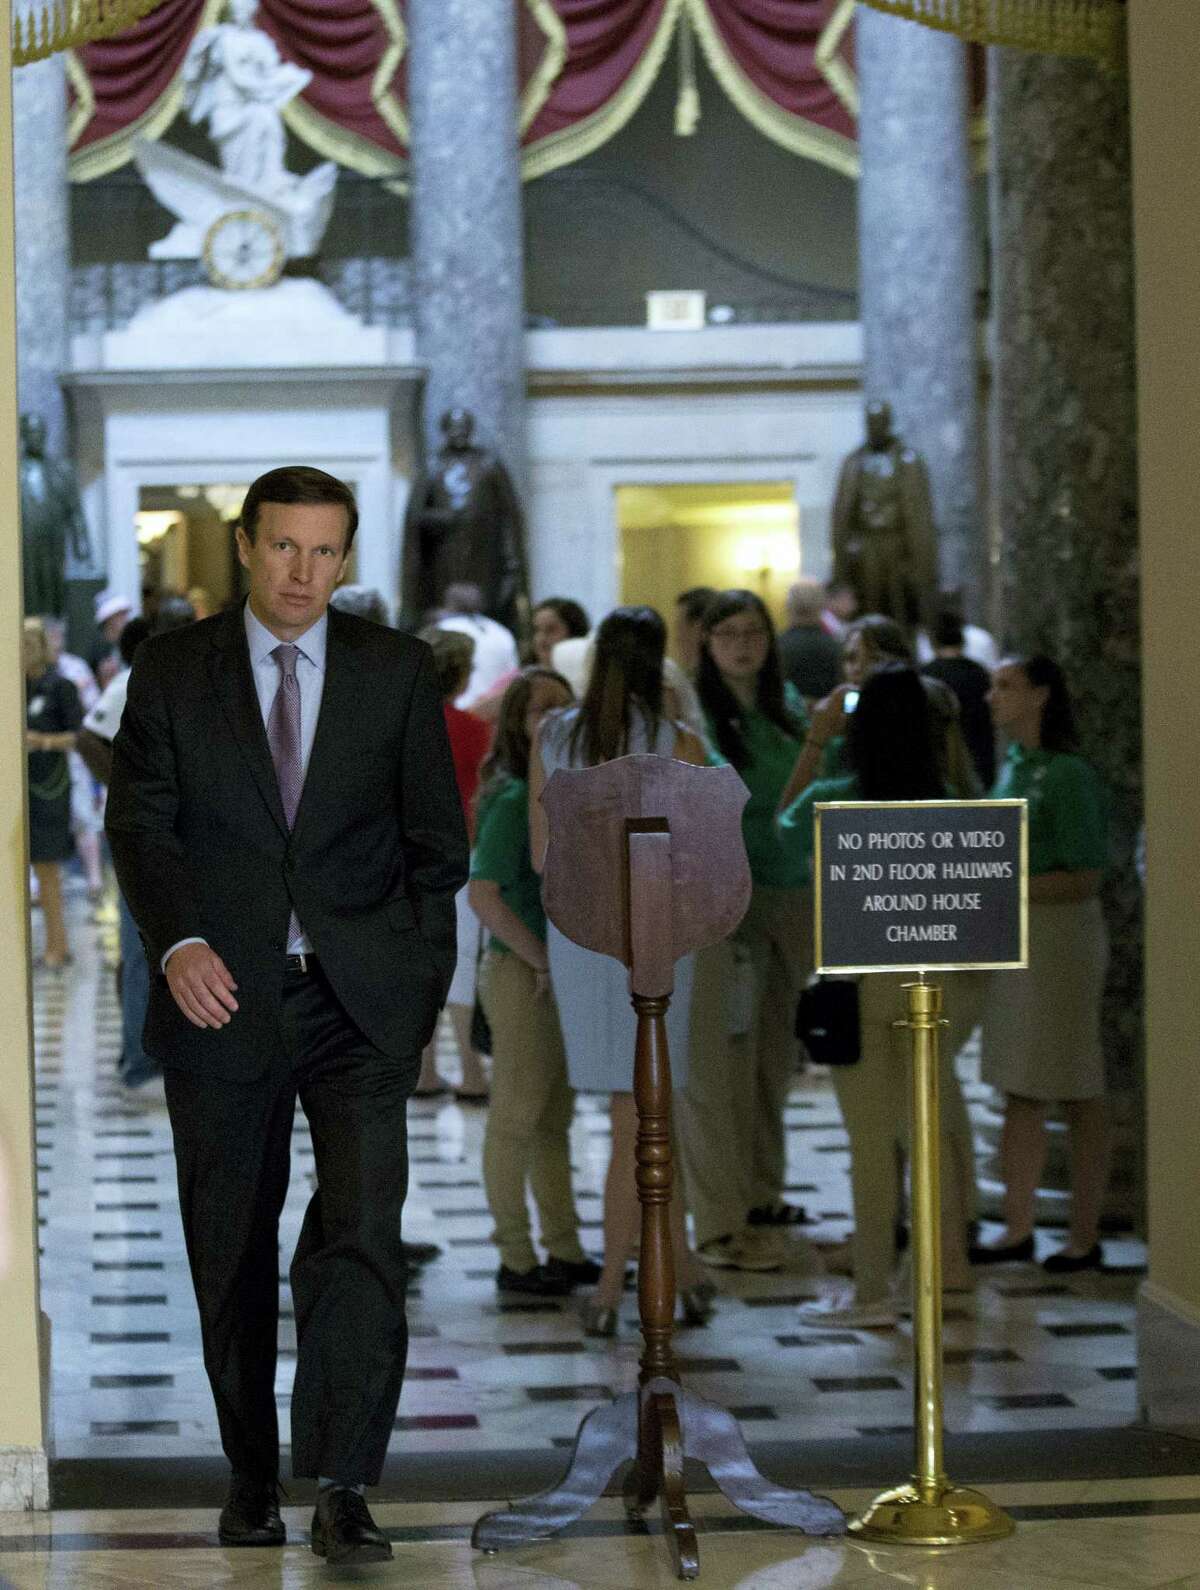 Sen. Chris Murphy, D-Conn., heads to the House chamber on Capitol Hill in Washington on June 22, 2016 to show support for the sit-down protest, seeking a vote on gun control measures on the floor of the House.